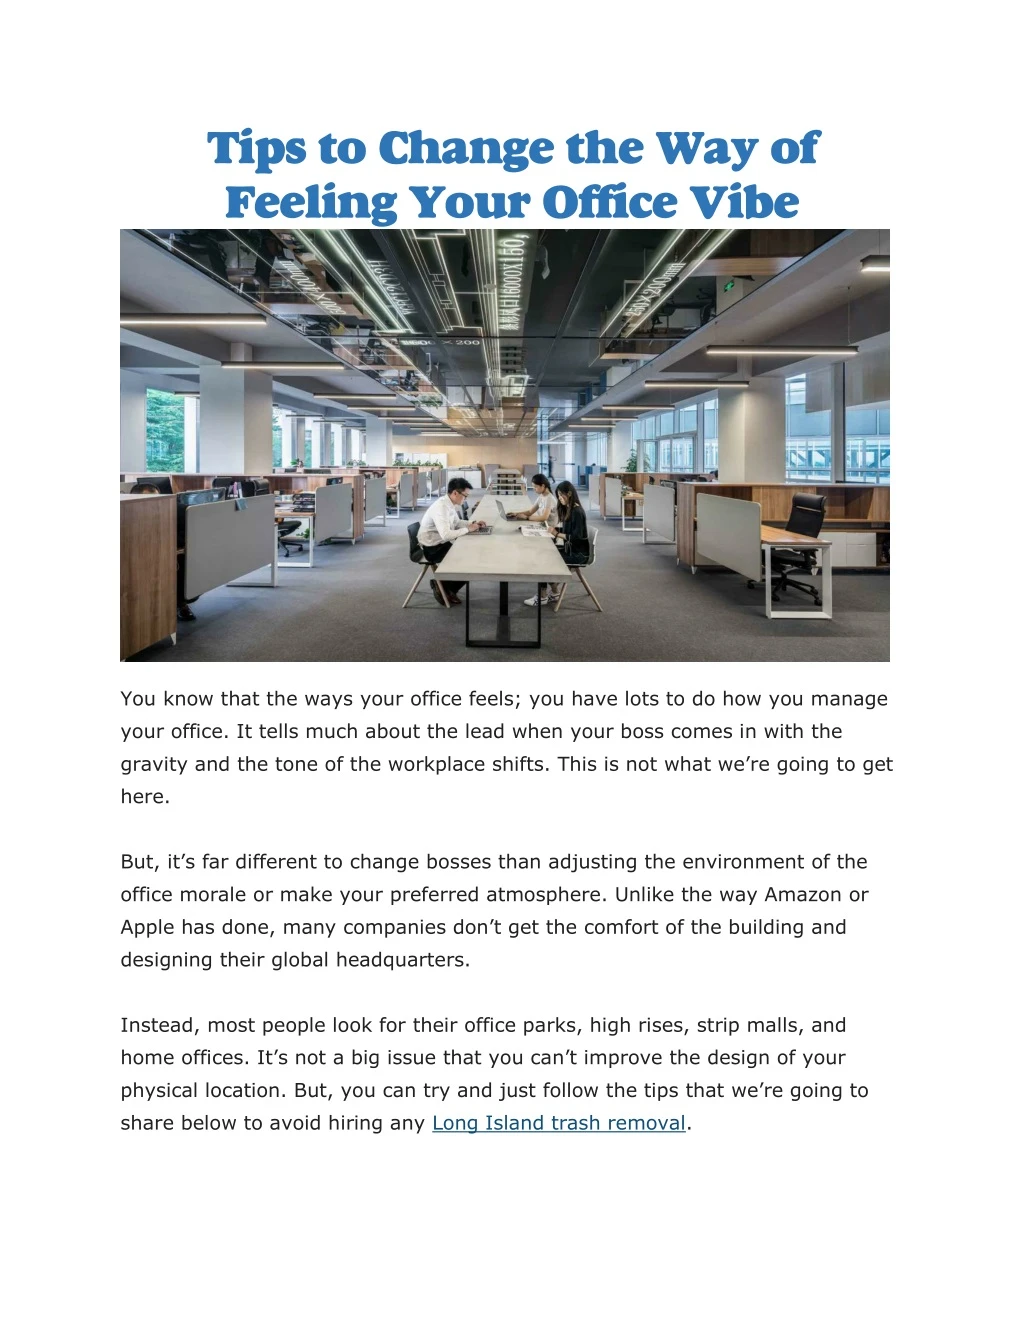 tips to change the way of feeling your office vibe